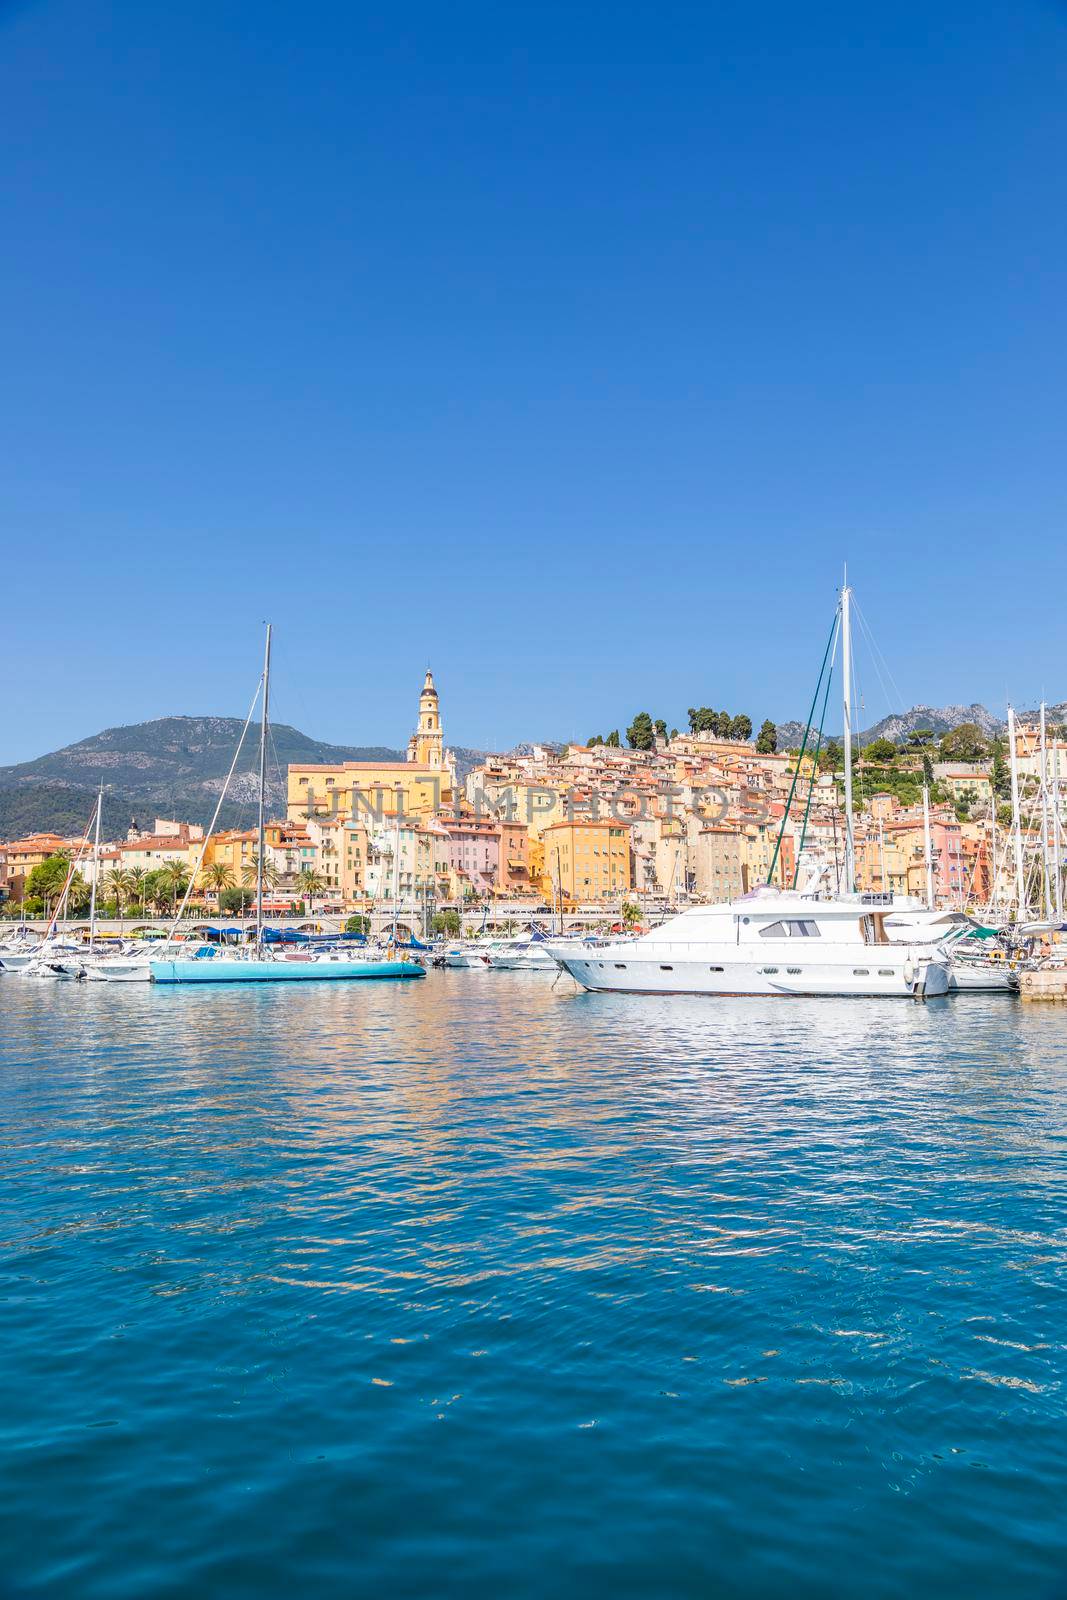 Menton on the French Riviera, named the Coast Azur, located in the South of France by Perseomedusa